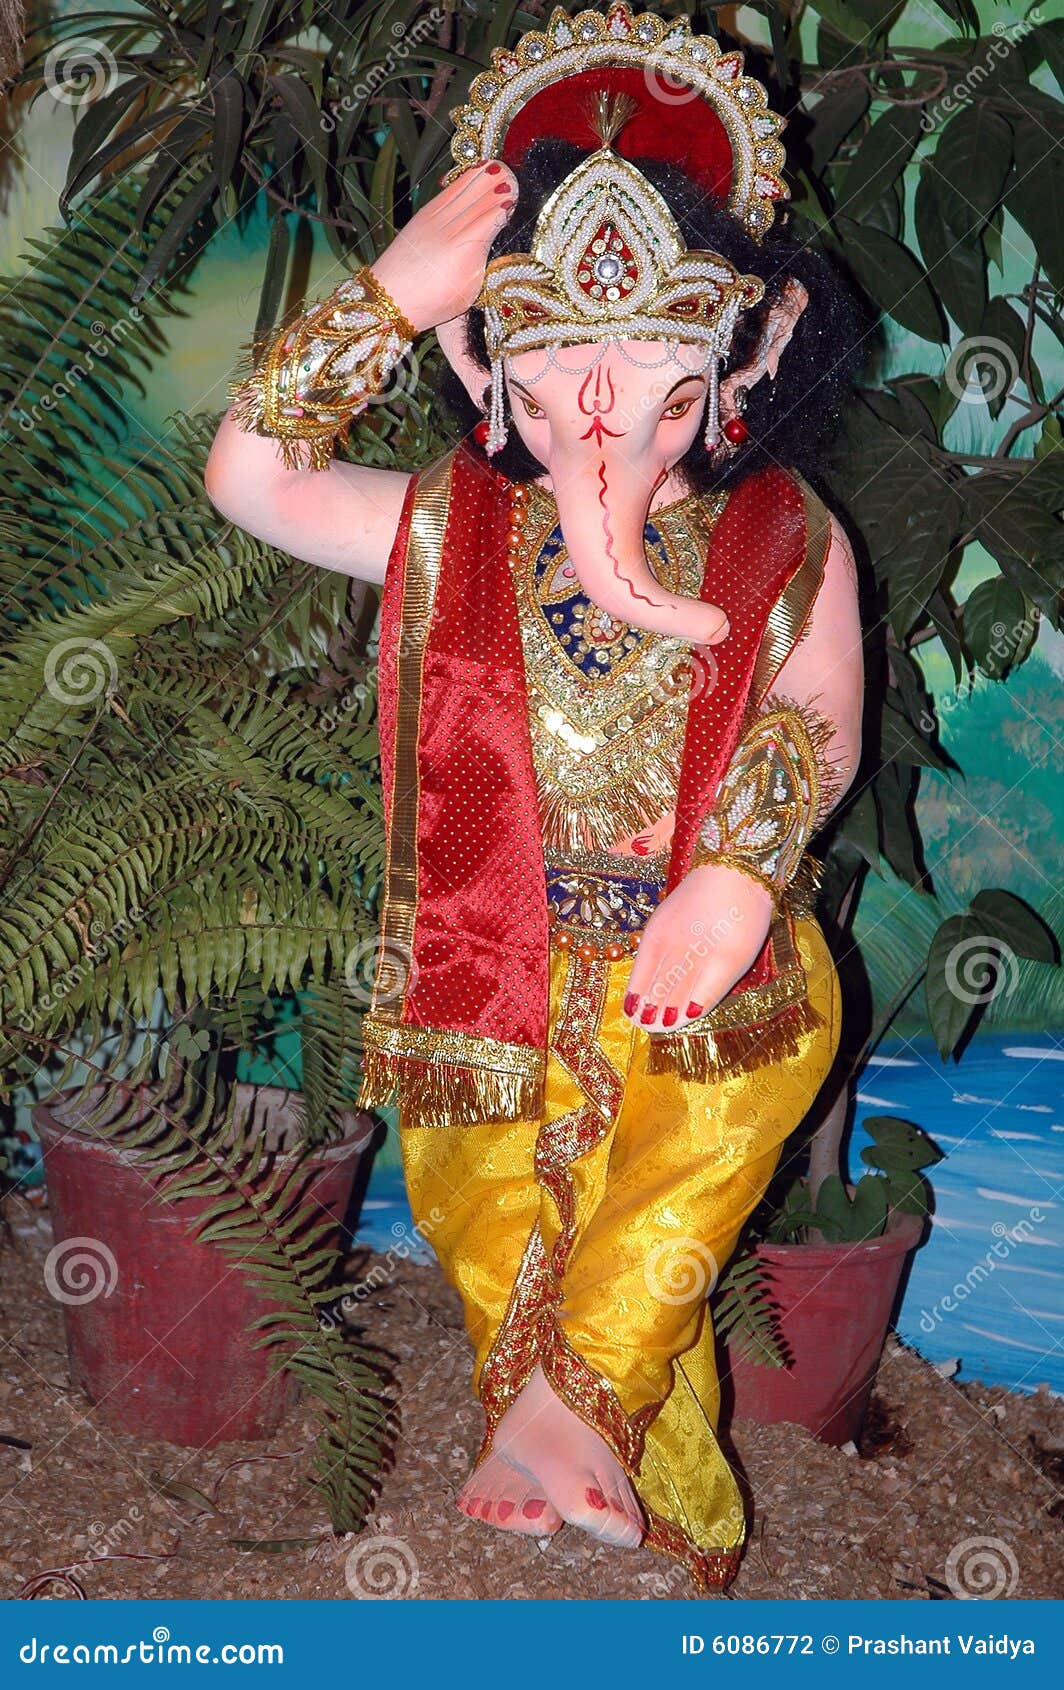 Lord Ganesha In Role Of Krishna Picture. Image: 6086772